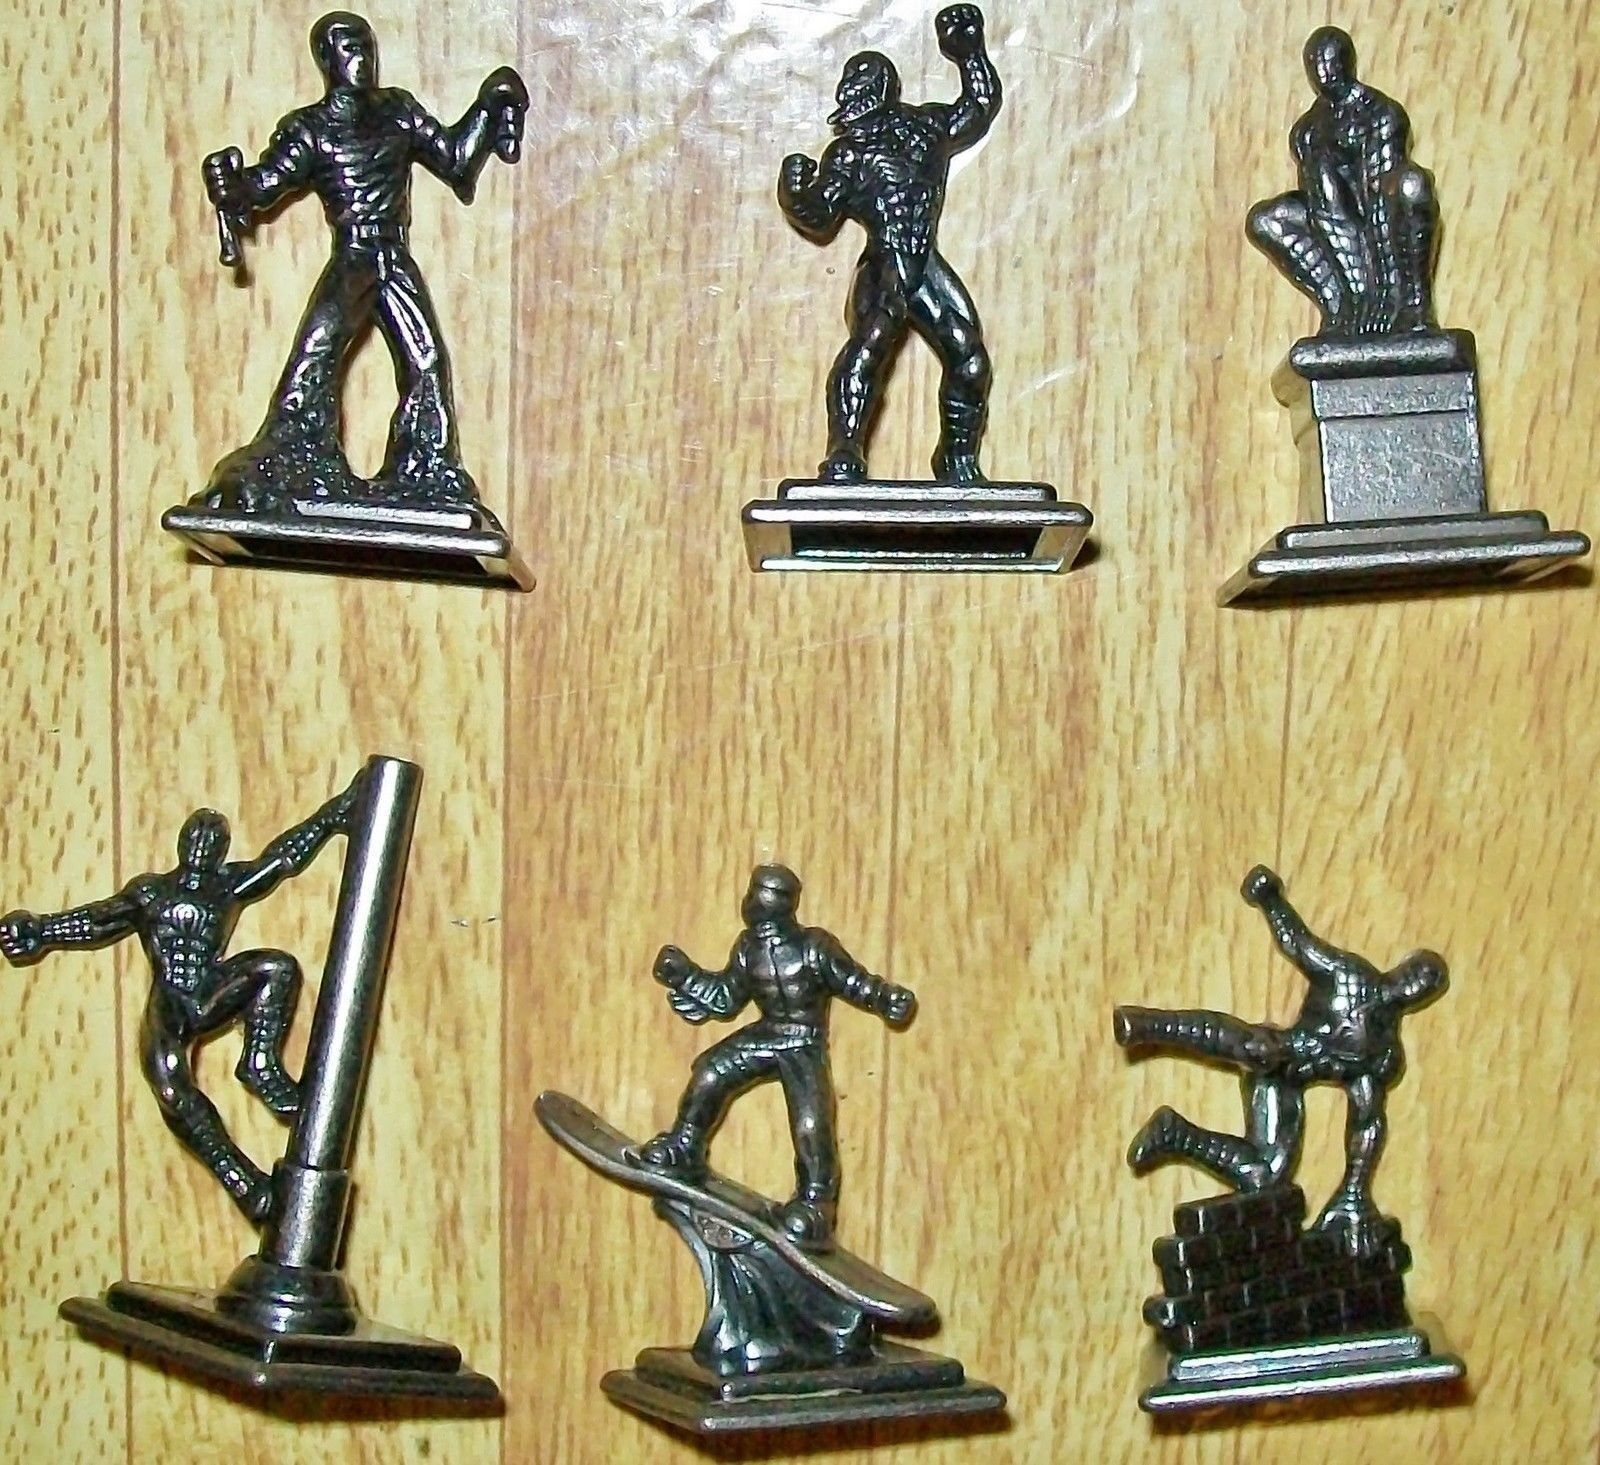 COMPLETE SET OF ALL 6 SPIDER-MAN MONOPOLY PEWTER GAME TOKENS (3M860)  Very Large